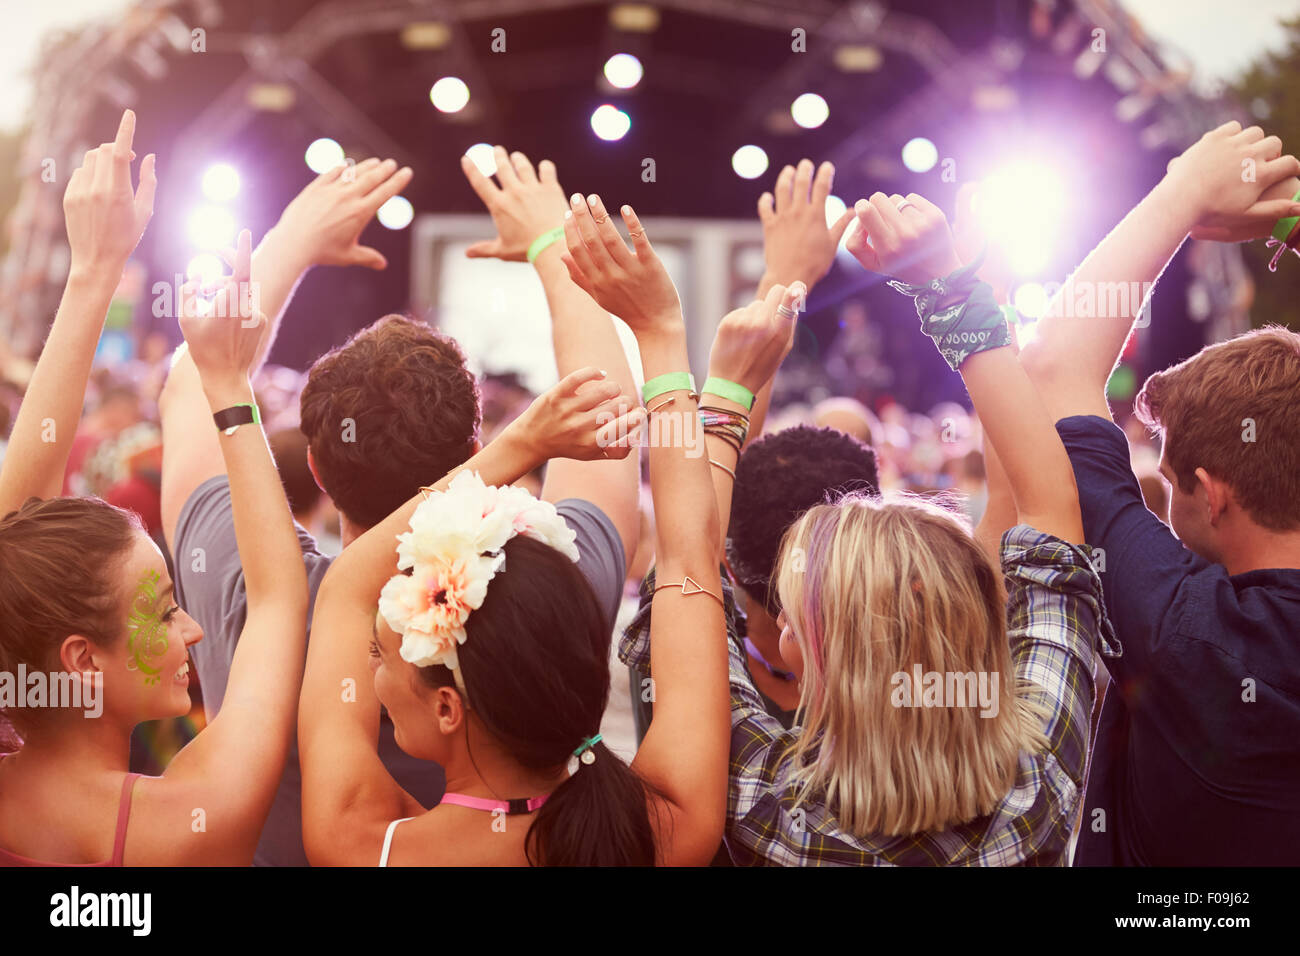 Audience with hands in the air at a music festival Stock Photo